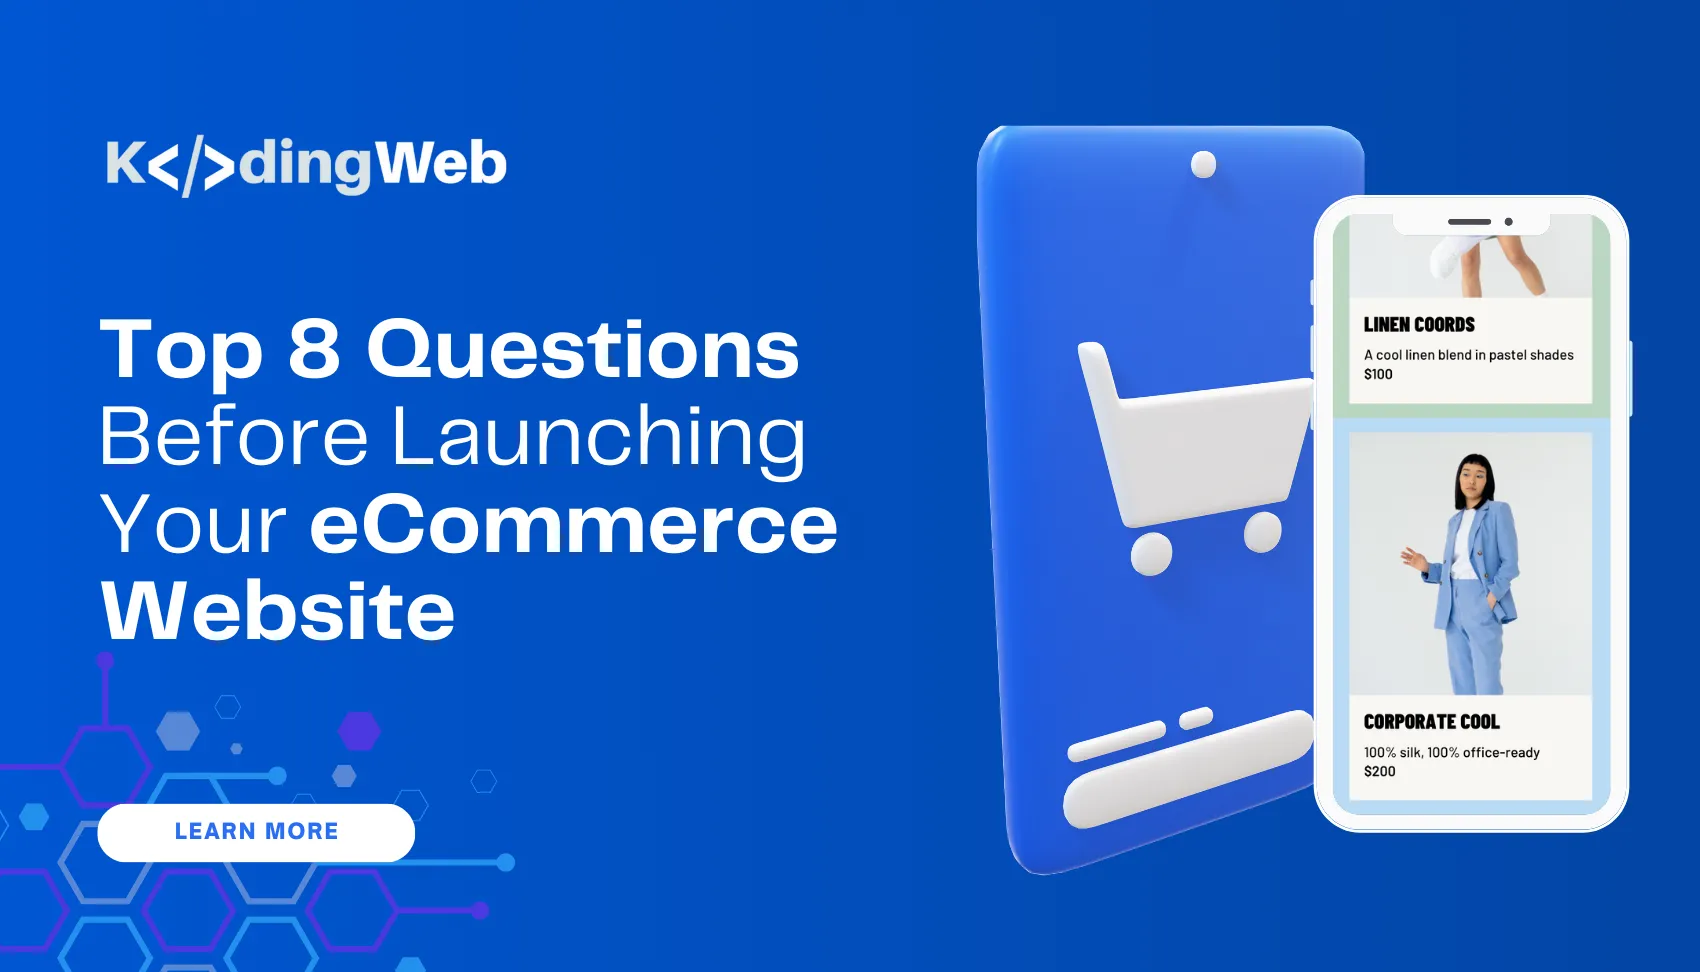 Top 8 Questions To Ask Before Launching Your eCommerce Website